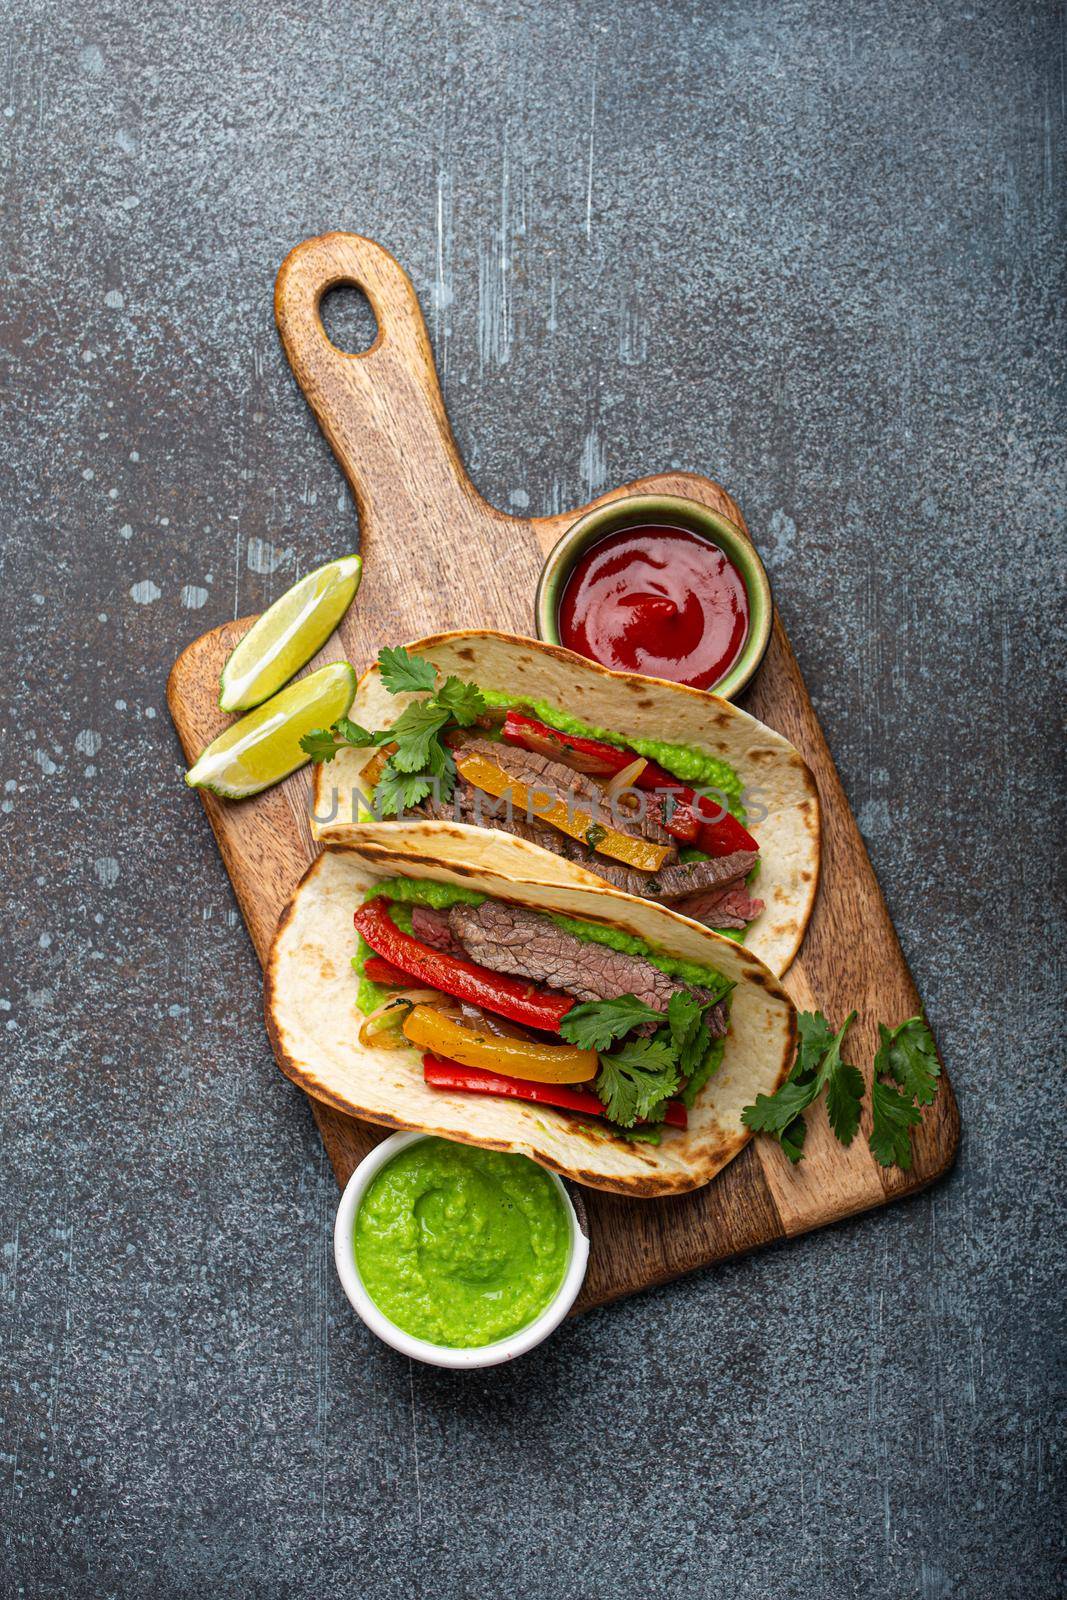 Traditional Mexican dish Beef fajitas tacos served on wooden cutting board with tomato salsa and guacamole on rustic stone background from above, American Mexican food